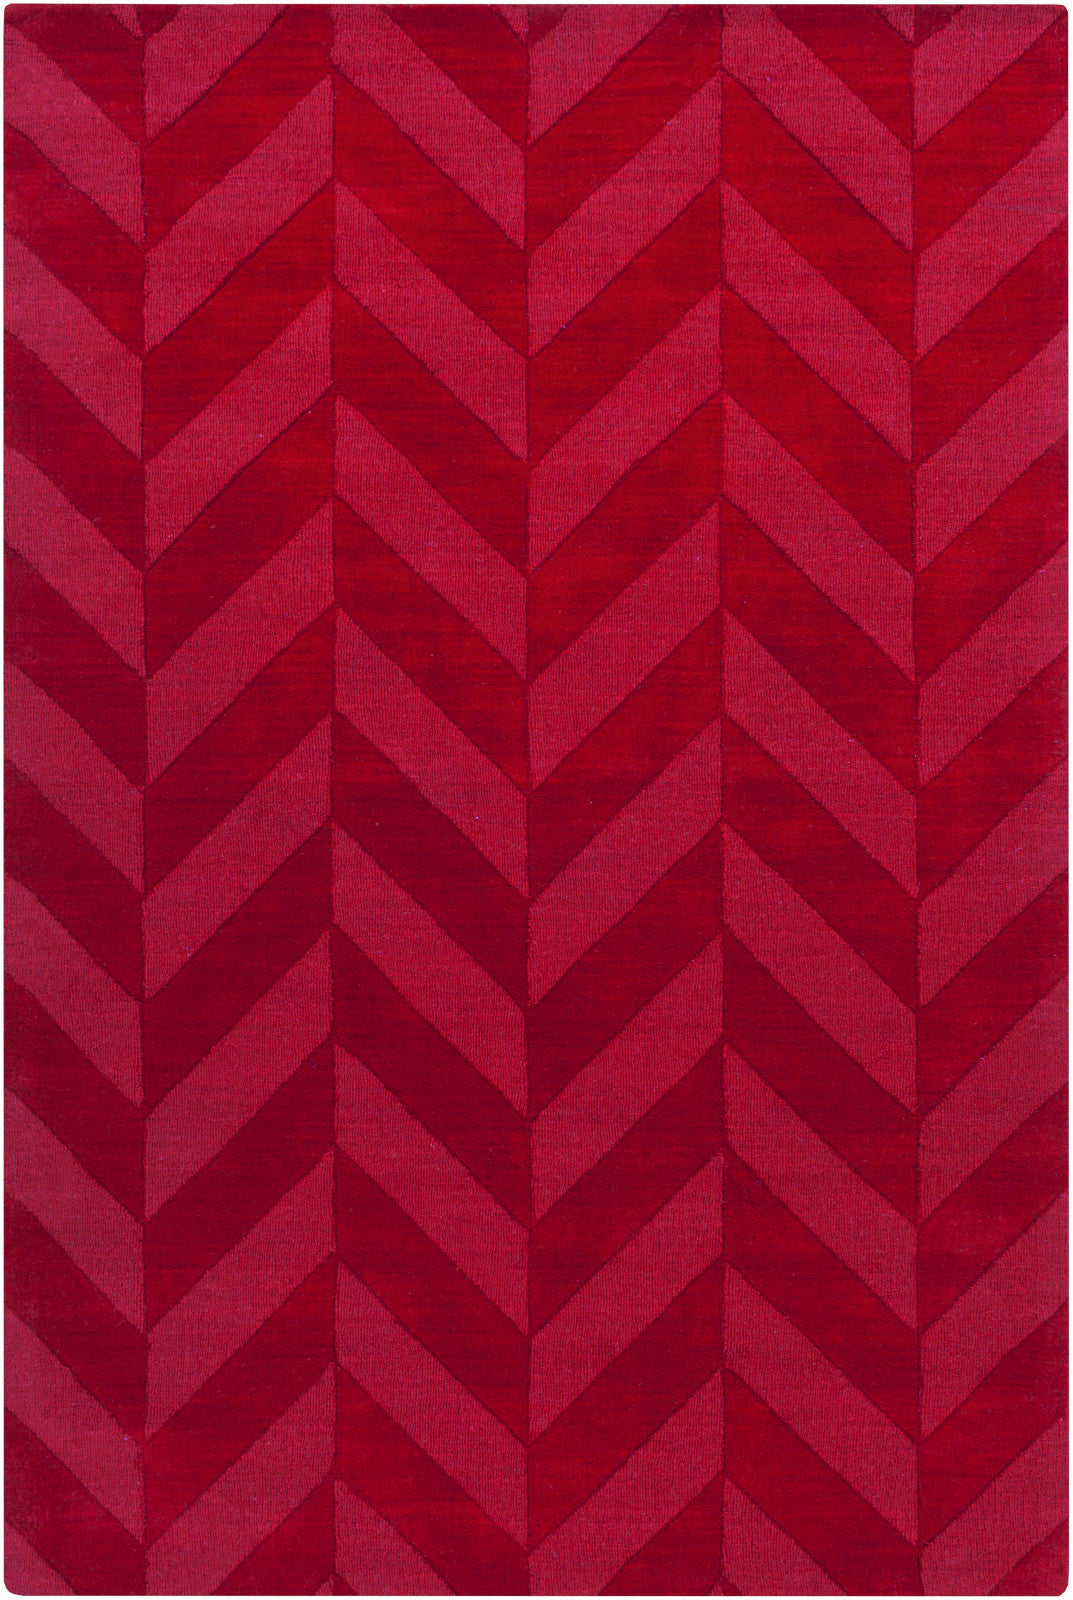 Artistic Weavers Central Park Carrie Crimson Red Area Rug main image